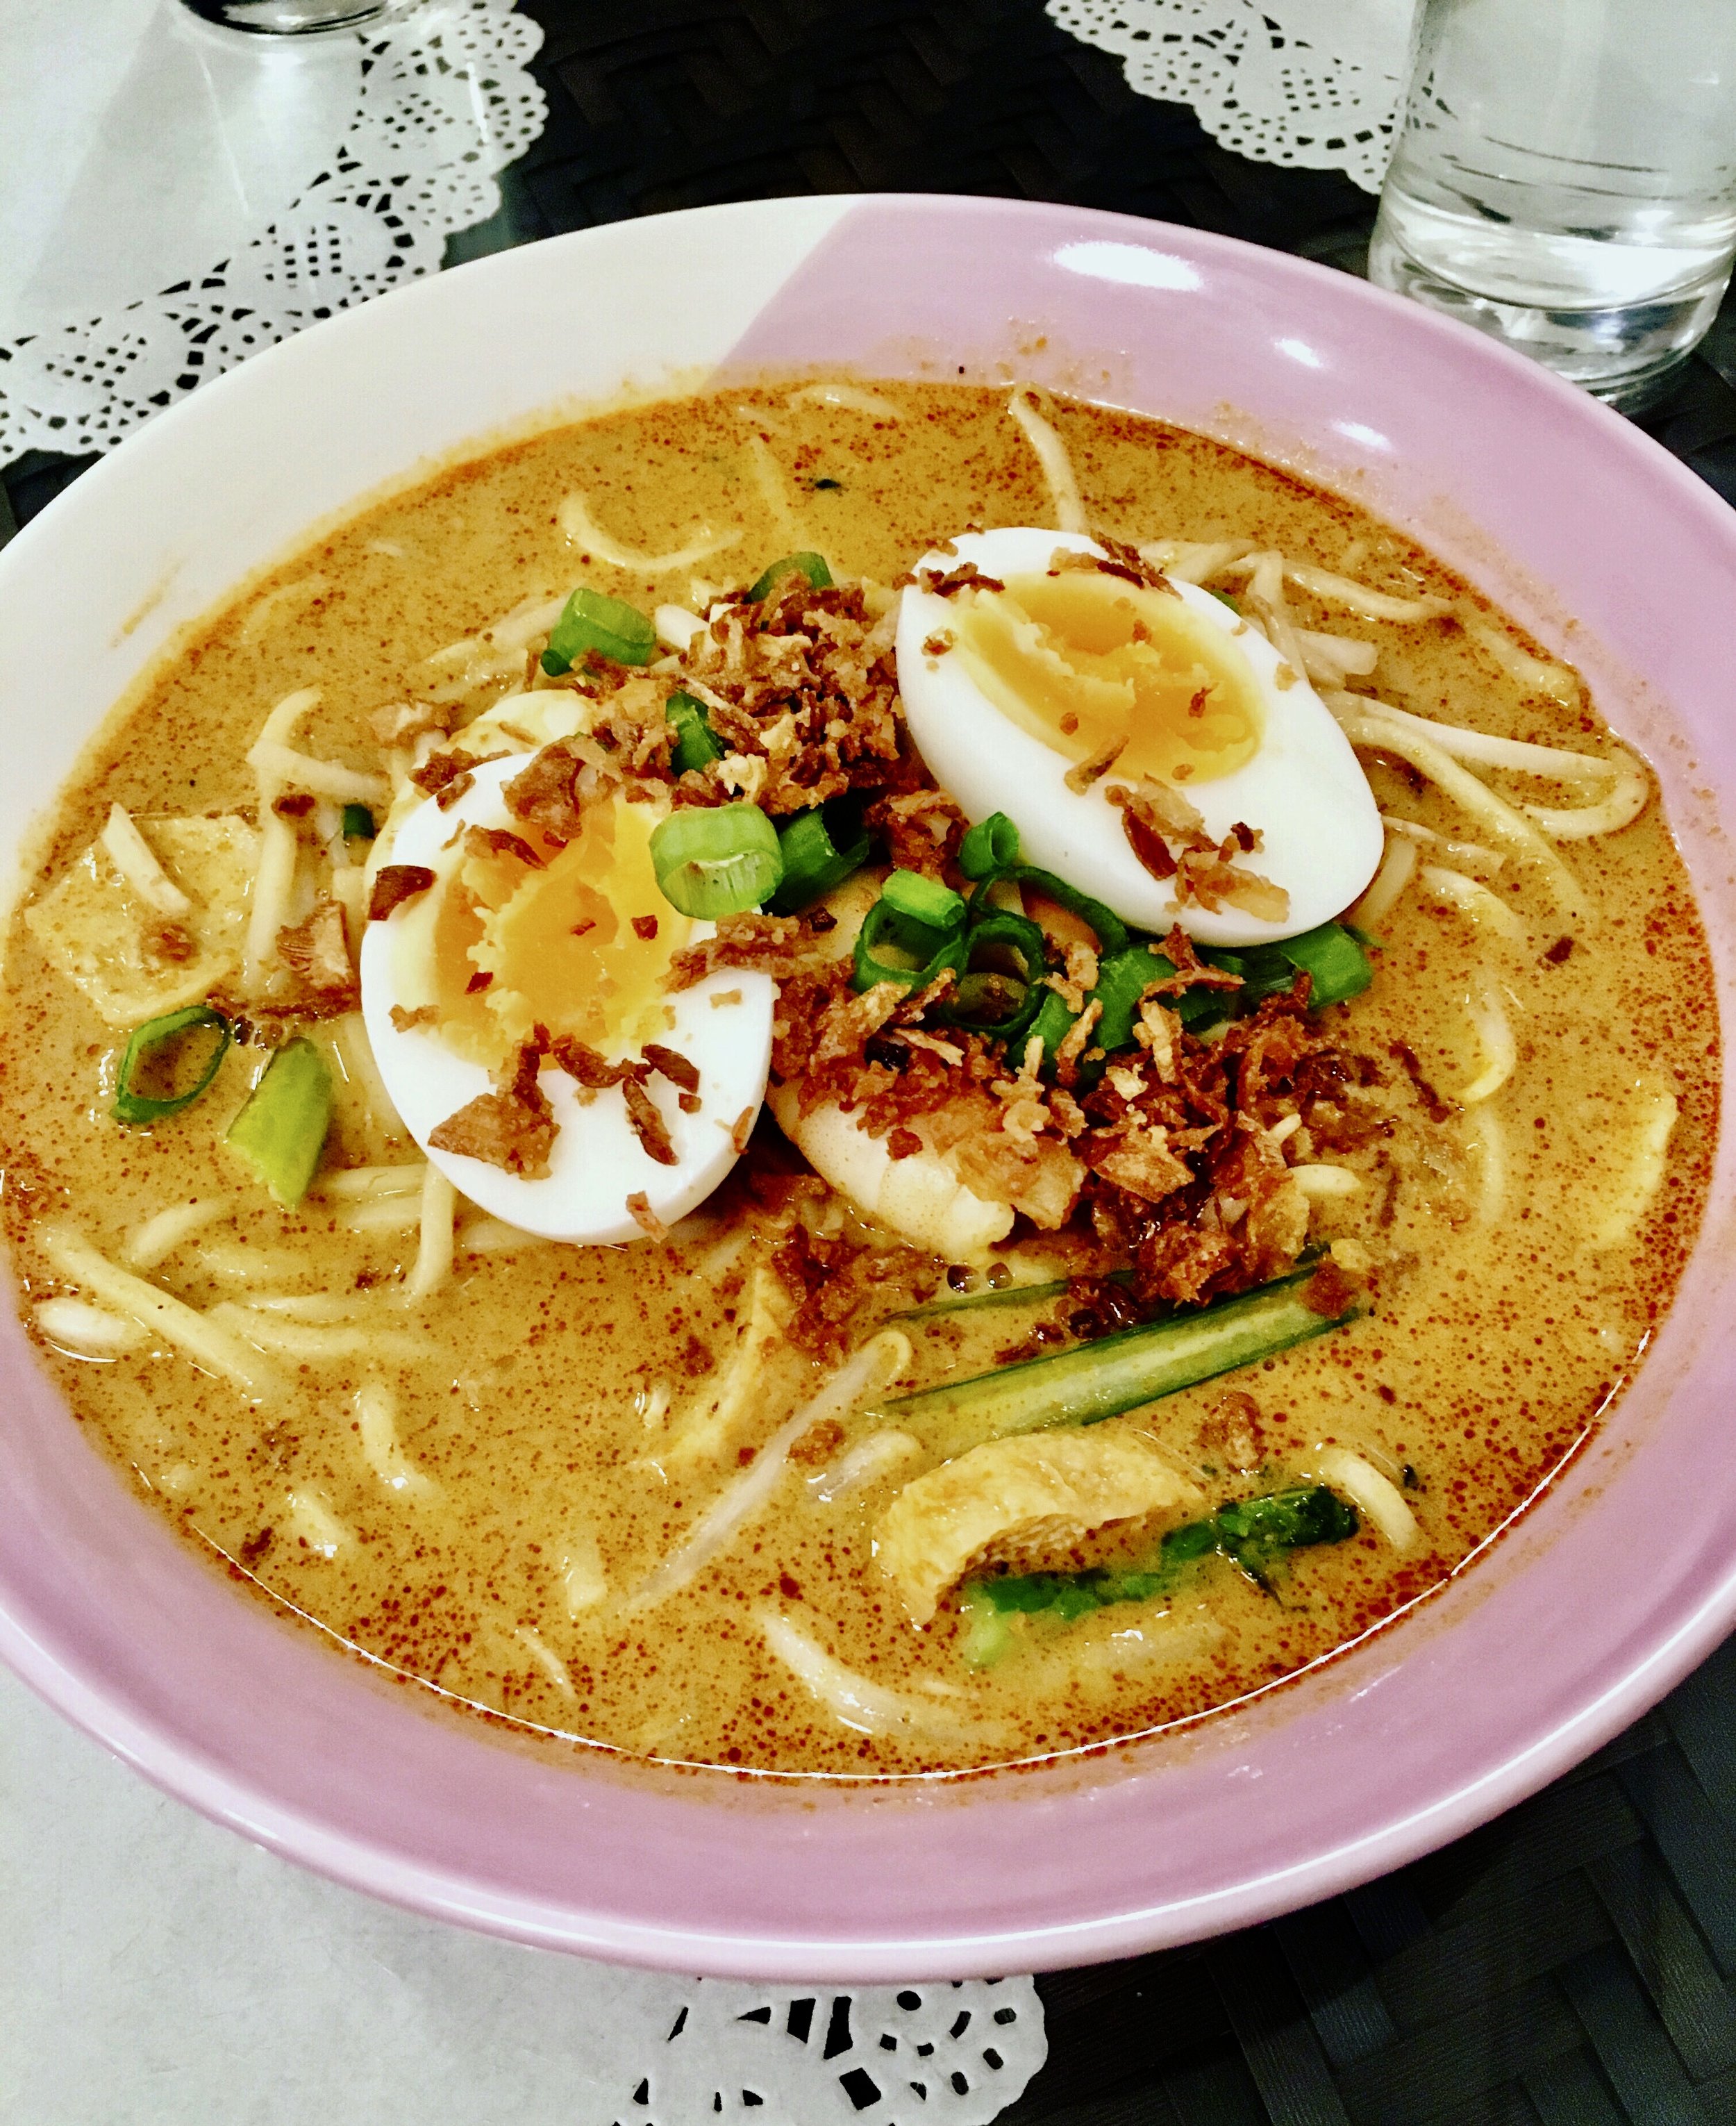 Curry laksa at Normah's Cafe, Queensway